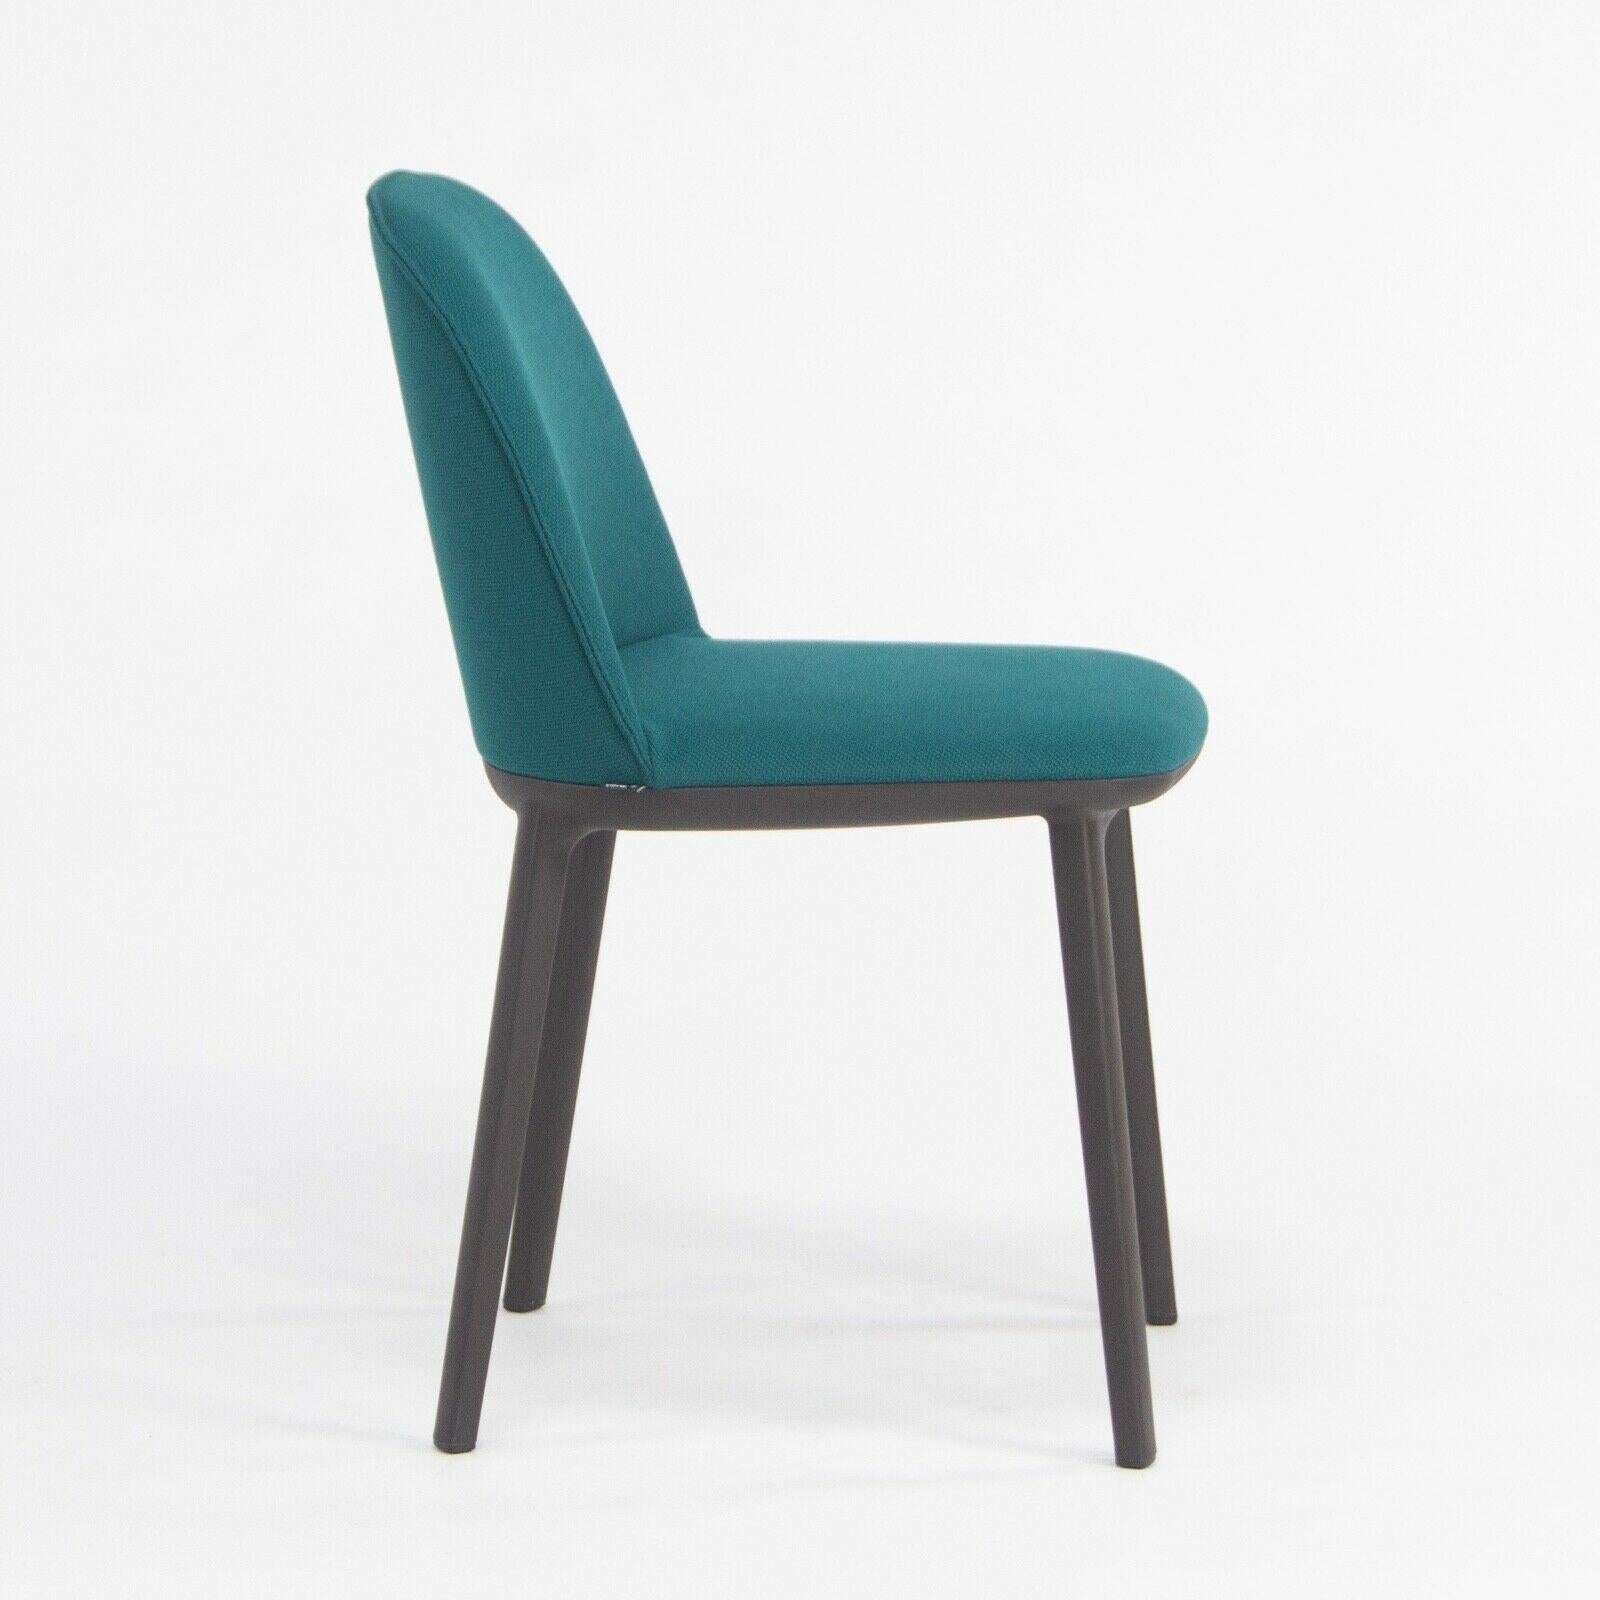 2019 Vitra Softshell Side Chair w/ Teal Blue Fabric by Ronan & Erwan Bouroullec For Sale 2